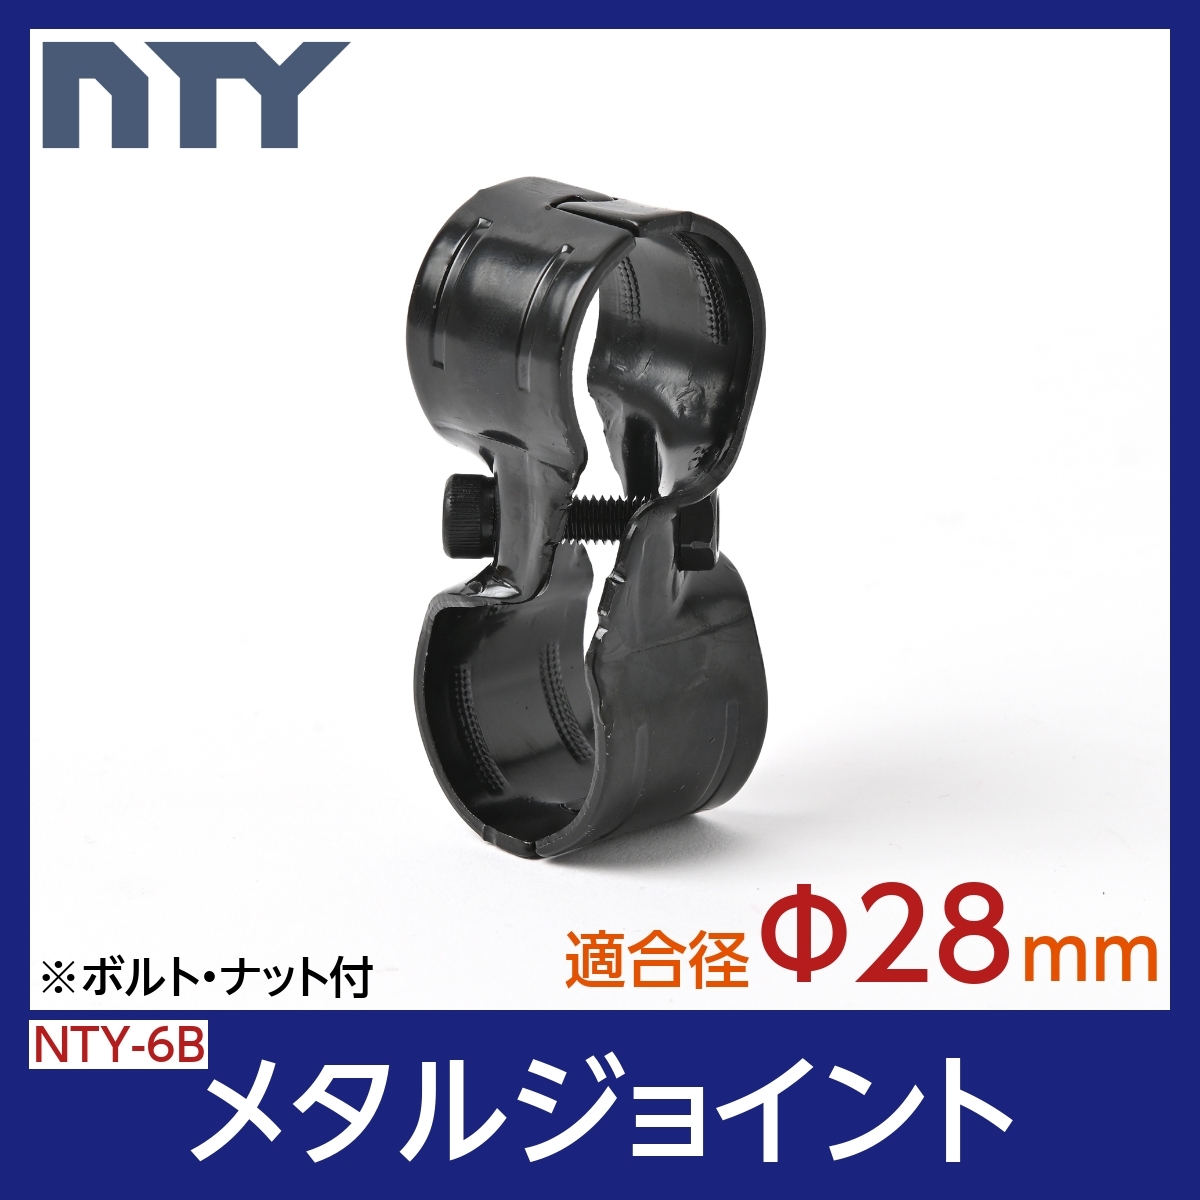 NTY metal joint NTY-6B black Φ28mm for (irekta- metal joint. HJ-6. compatibility equipped ) assembly pipe Cross joint DIY shelves rack 